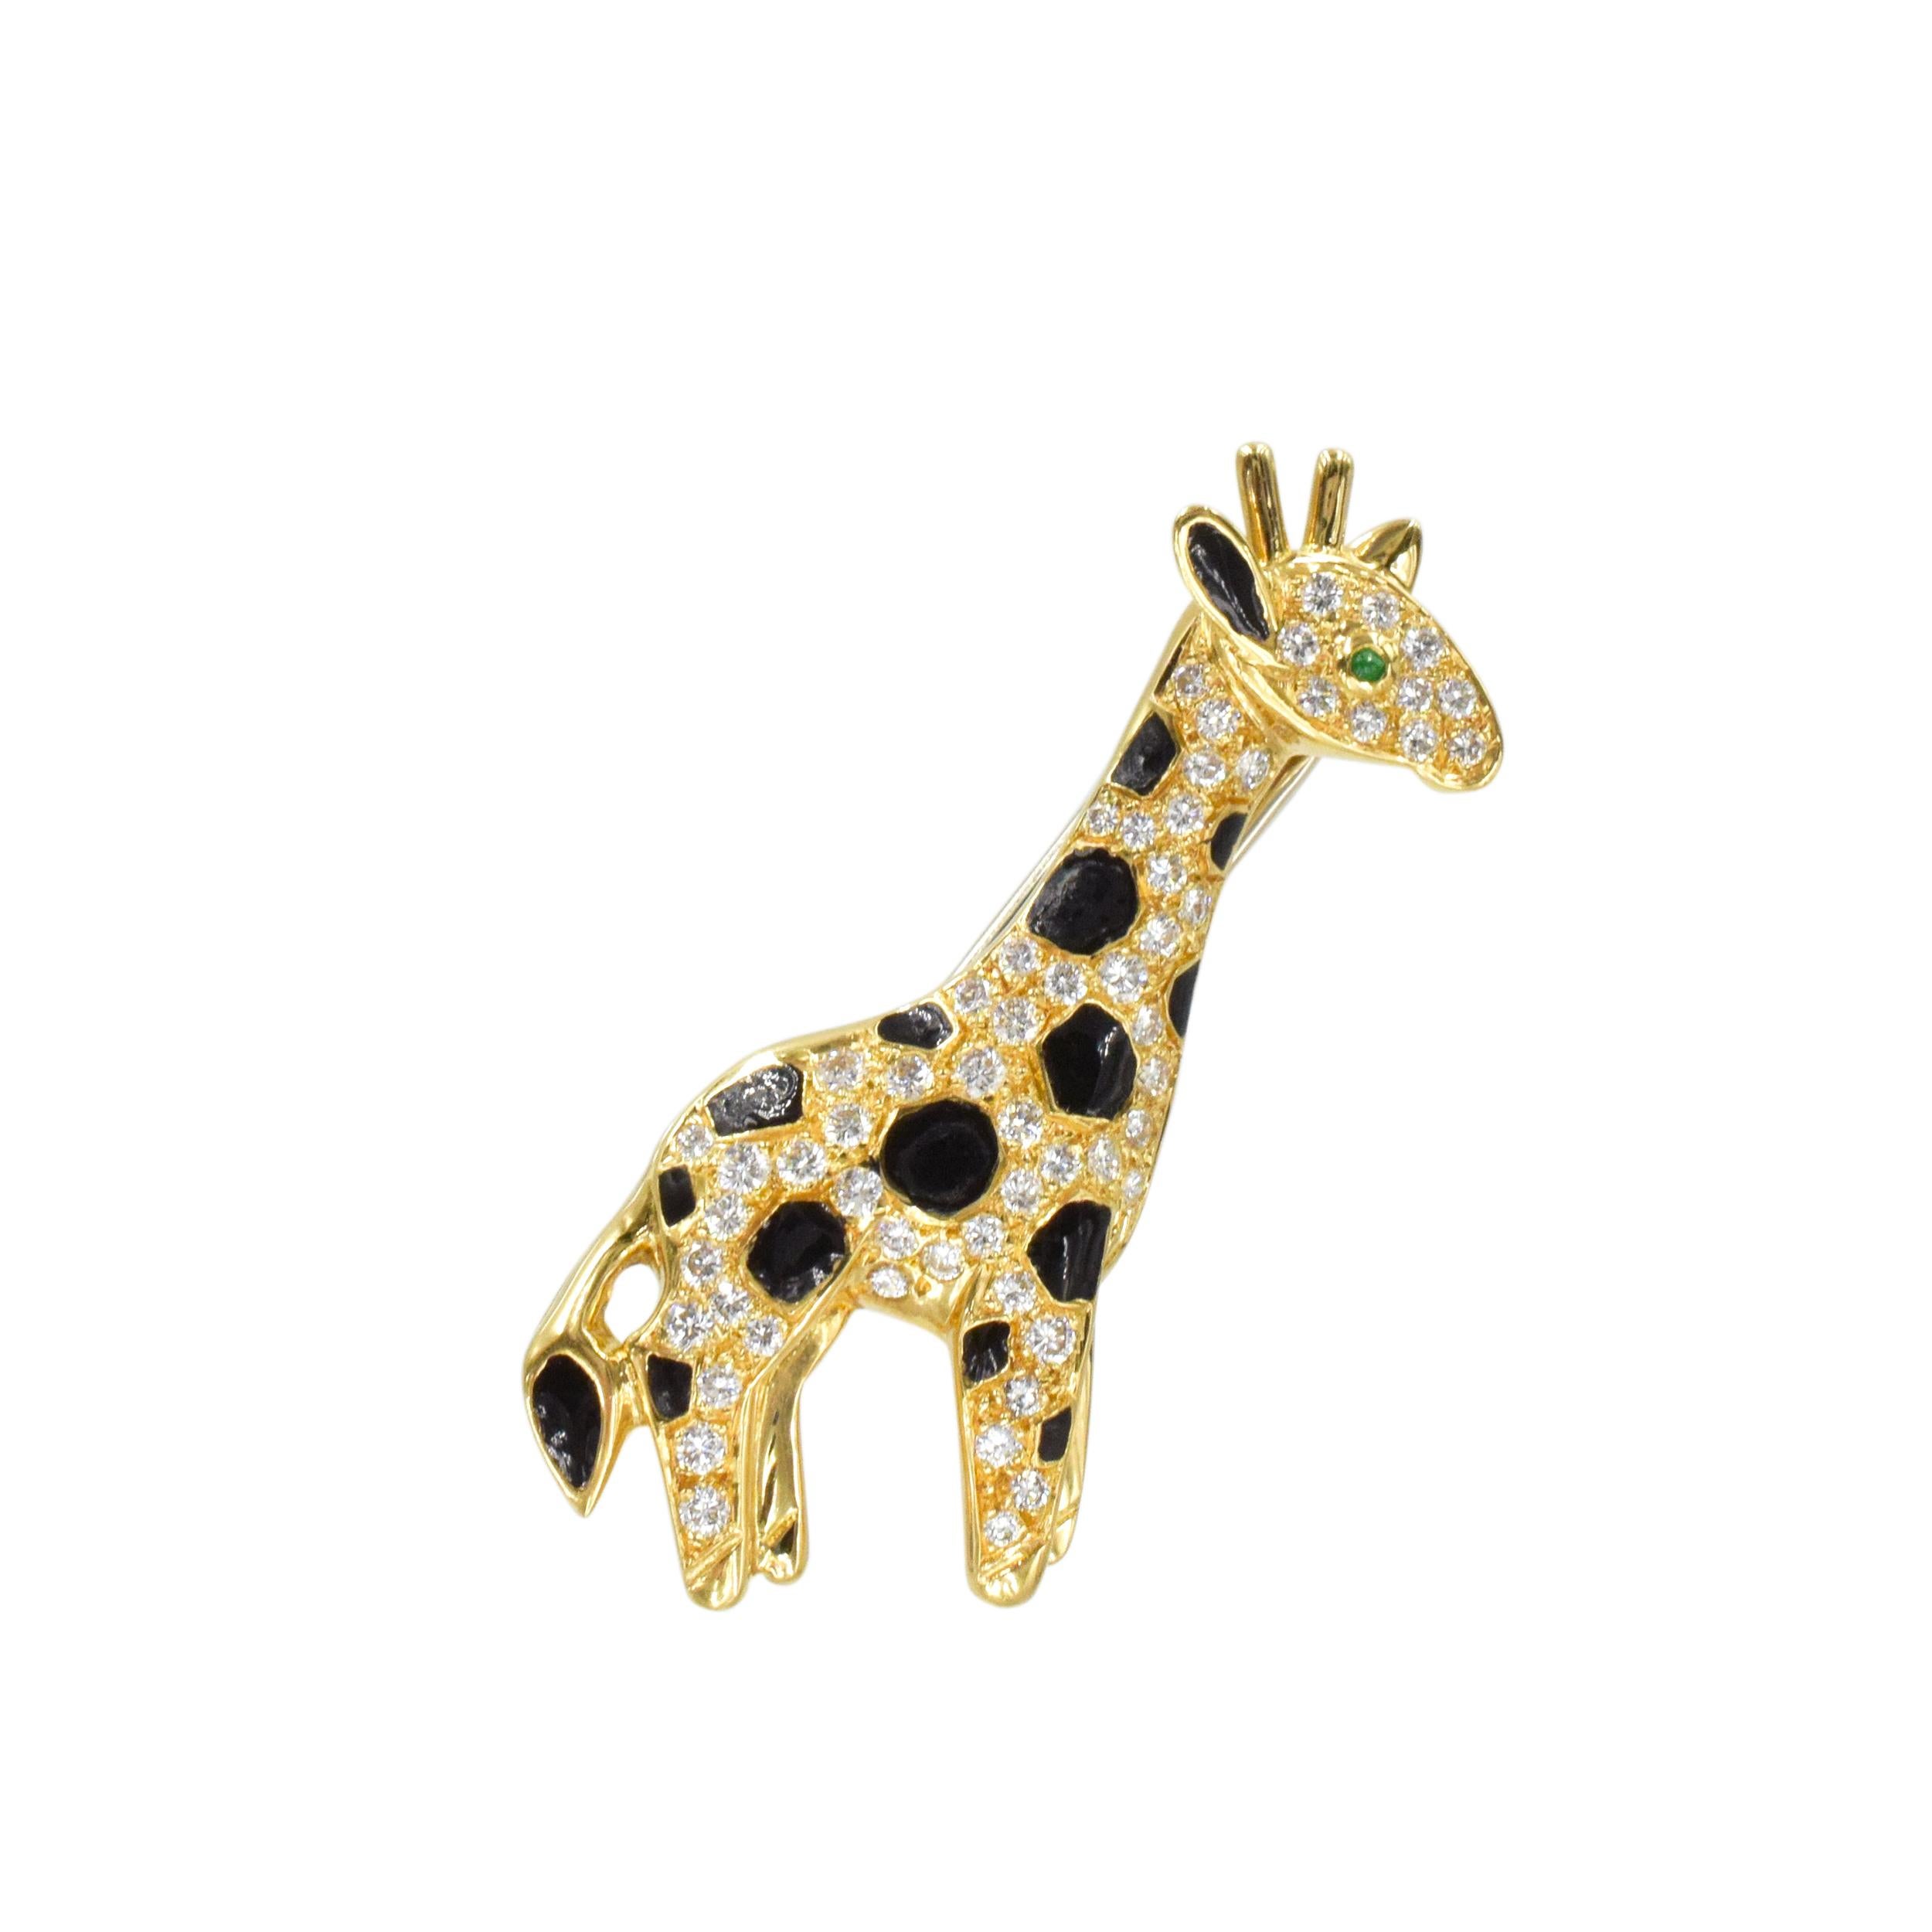 Van Cleef & Arpels diamond and enamel Giraffe brooch crafted in 18k yellow gold. 
This brooch is encrusted with 60 round brilliant cut diamonds with total weight of approximately 1.0ct, color E-F, clarity VS. The spots and tail inlaid with black